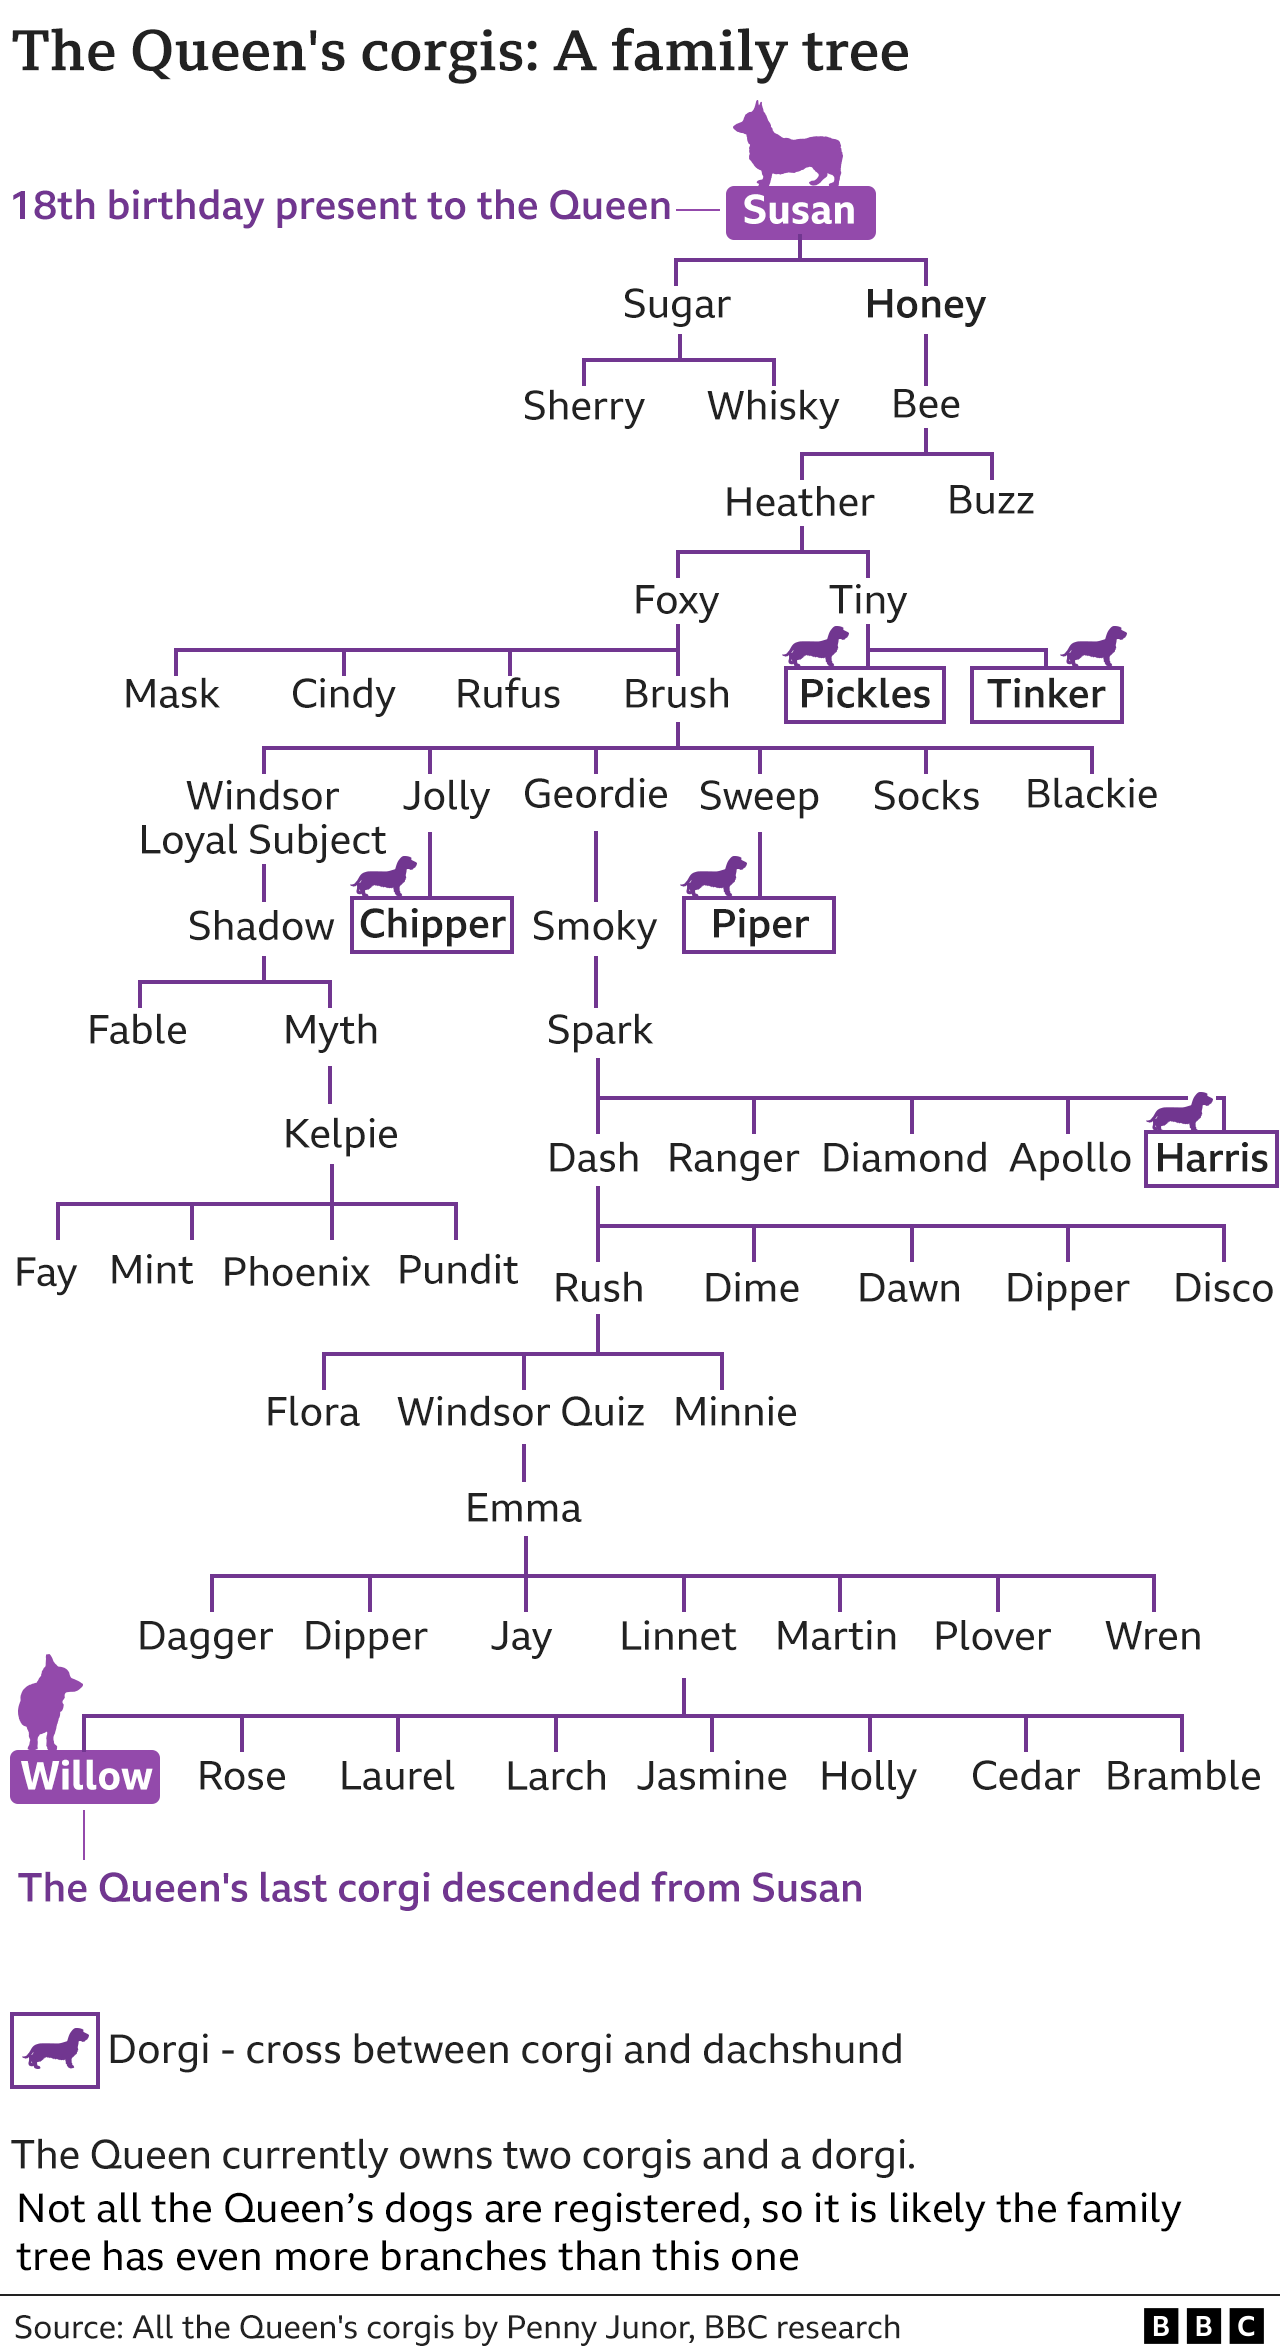 A family tree of all the Queen's corgis and dorgis, descended from Susan